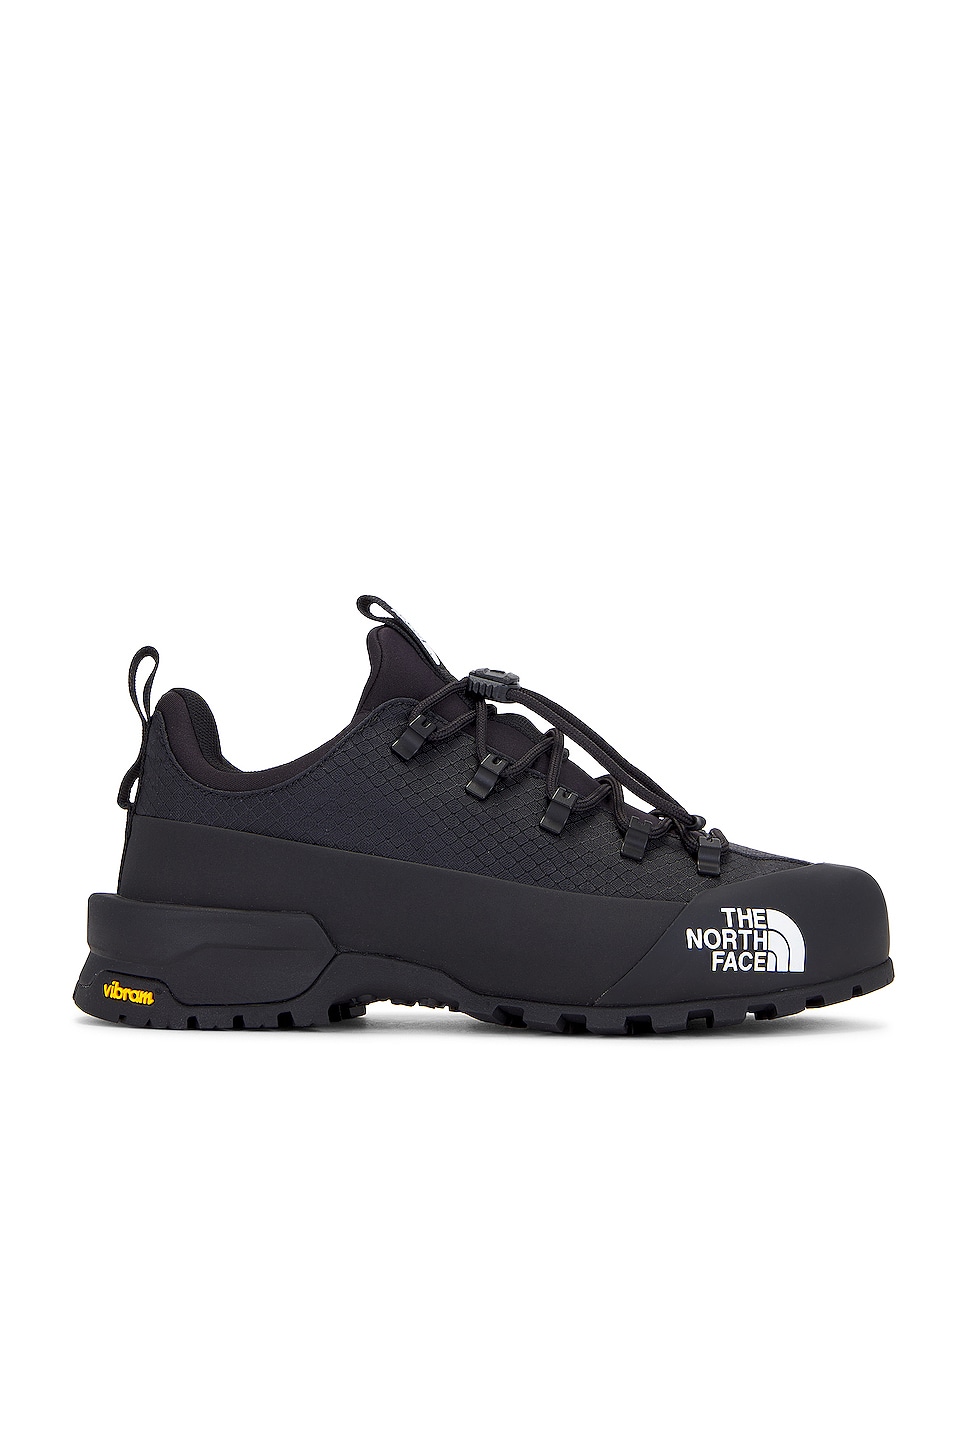 Image 1 of The North Face Glenclyffe Low Sneaker in Black & Tnf Black